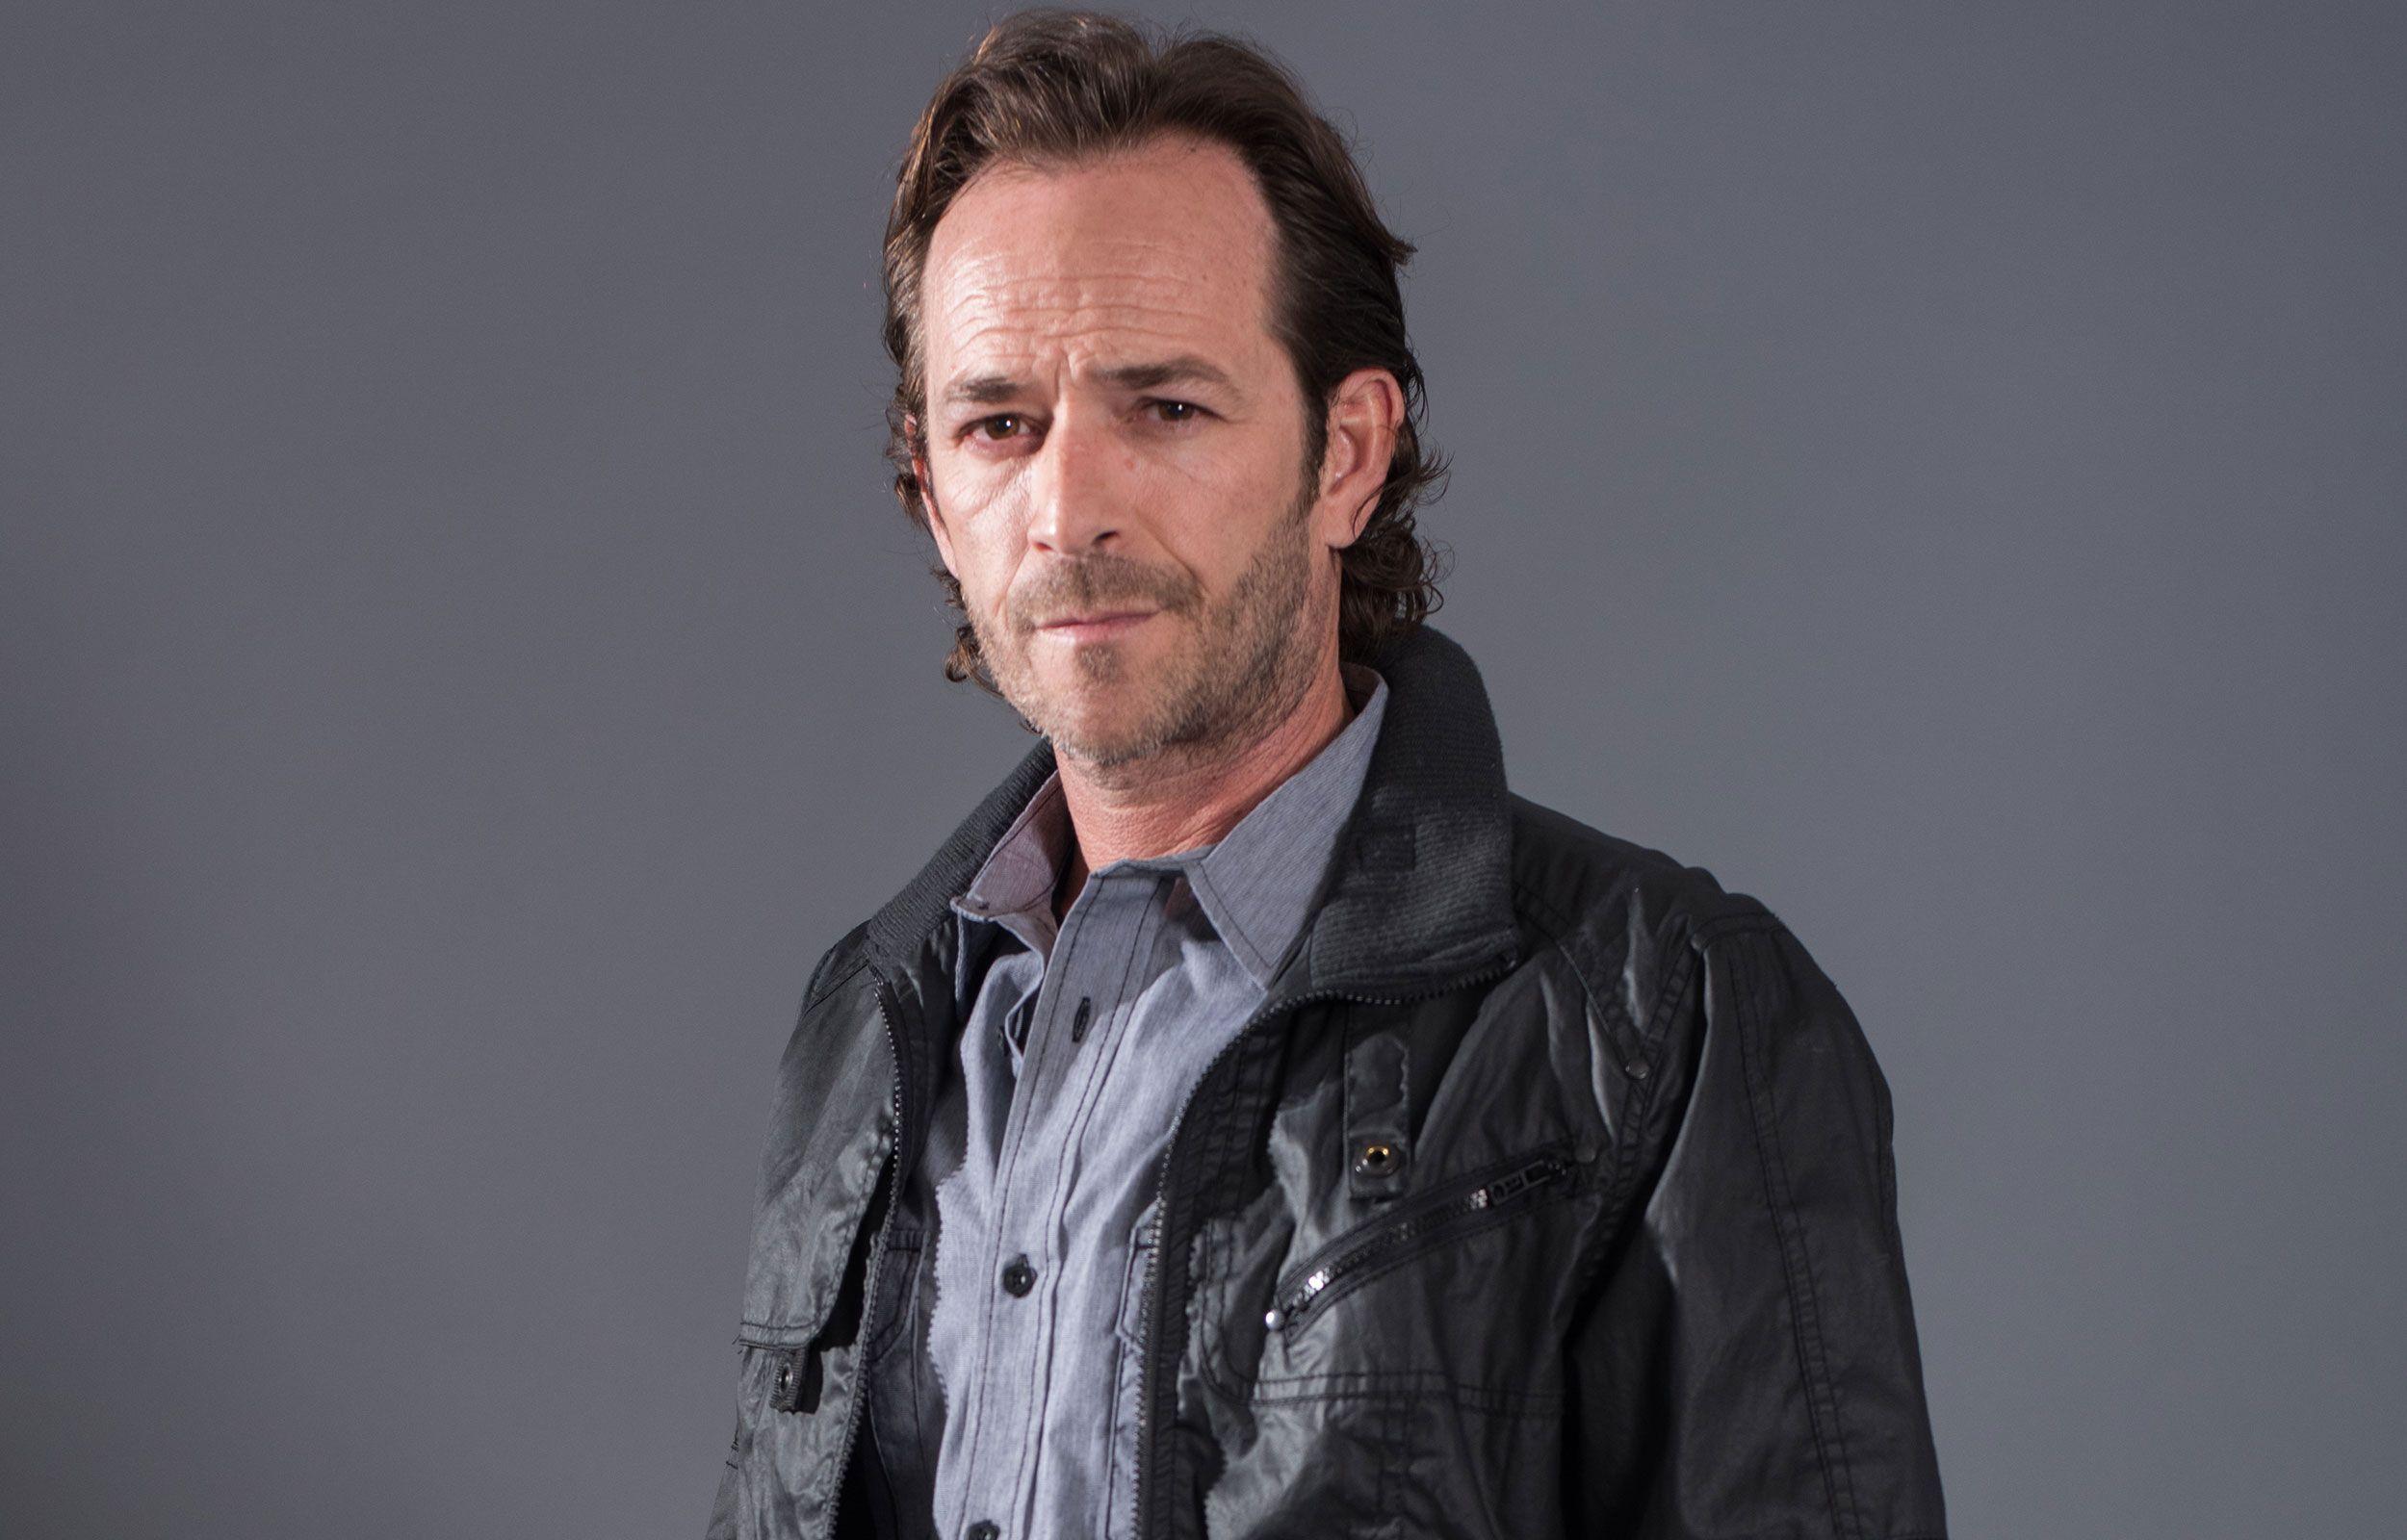 Luke Perry should play Sam Drake in a movie adaptation